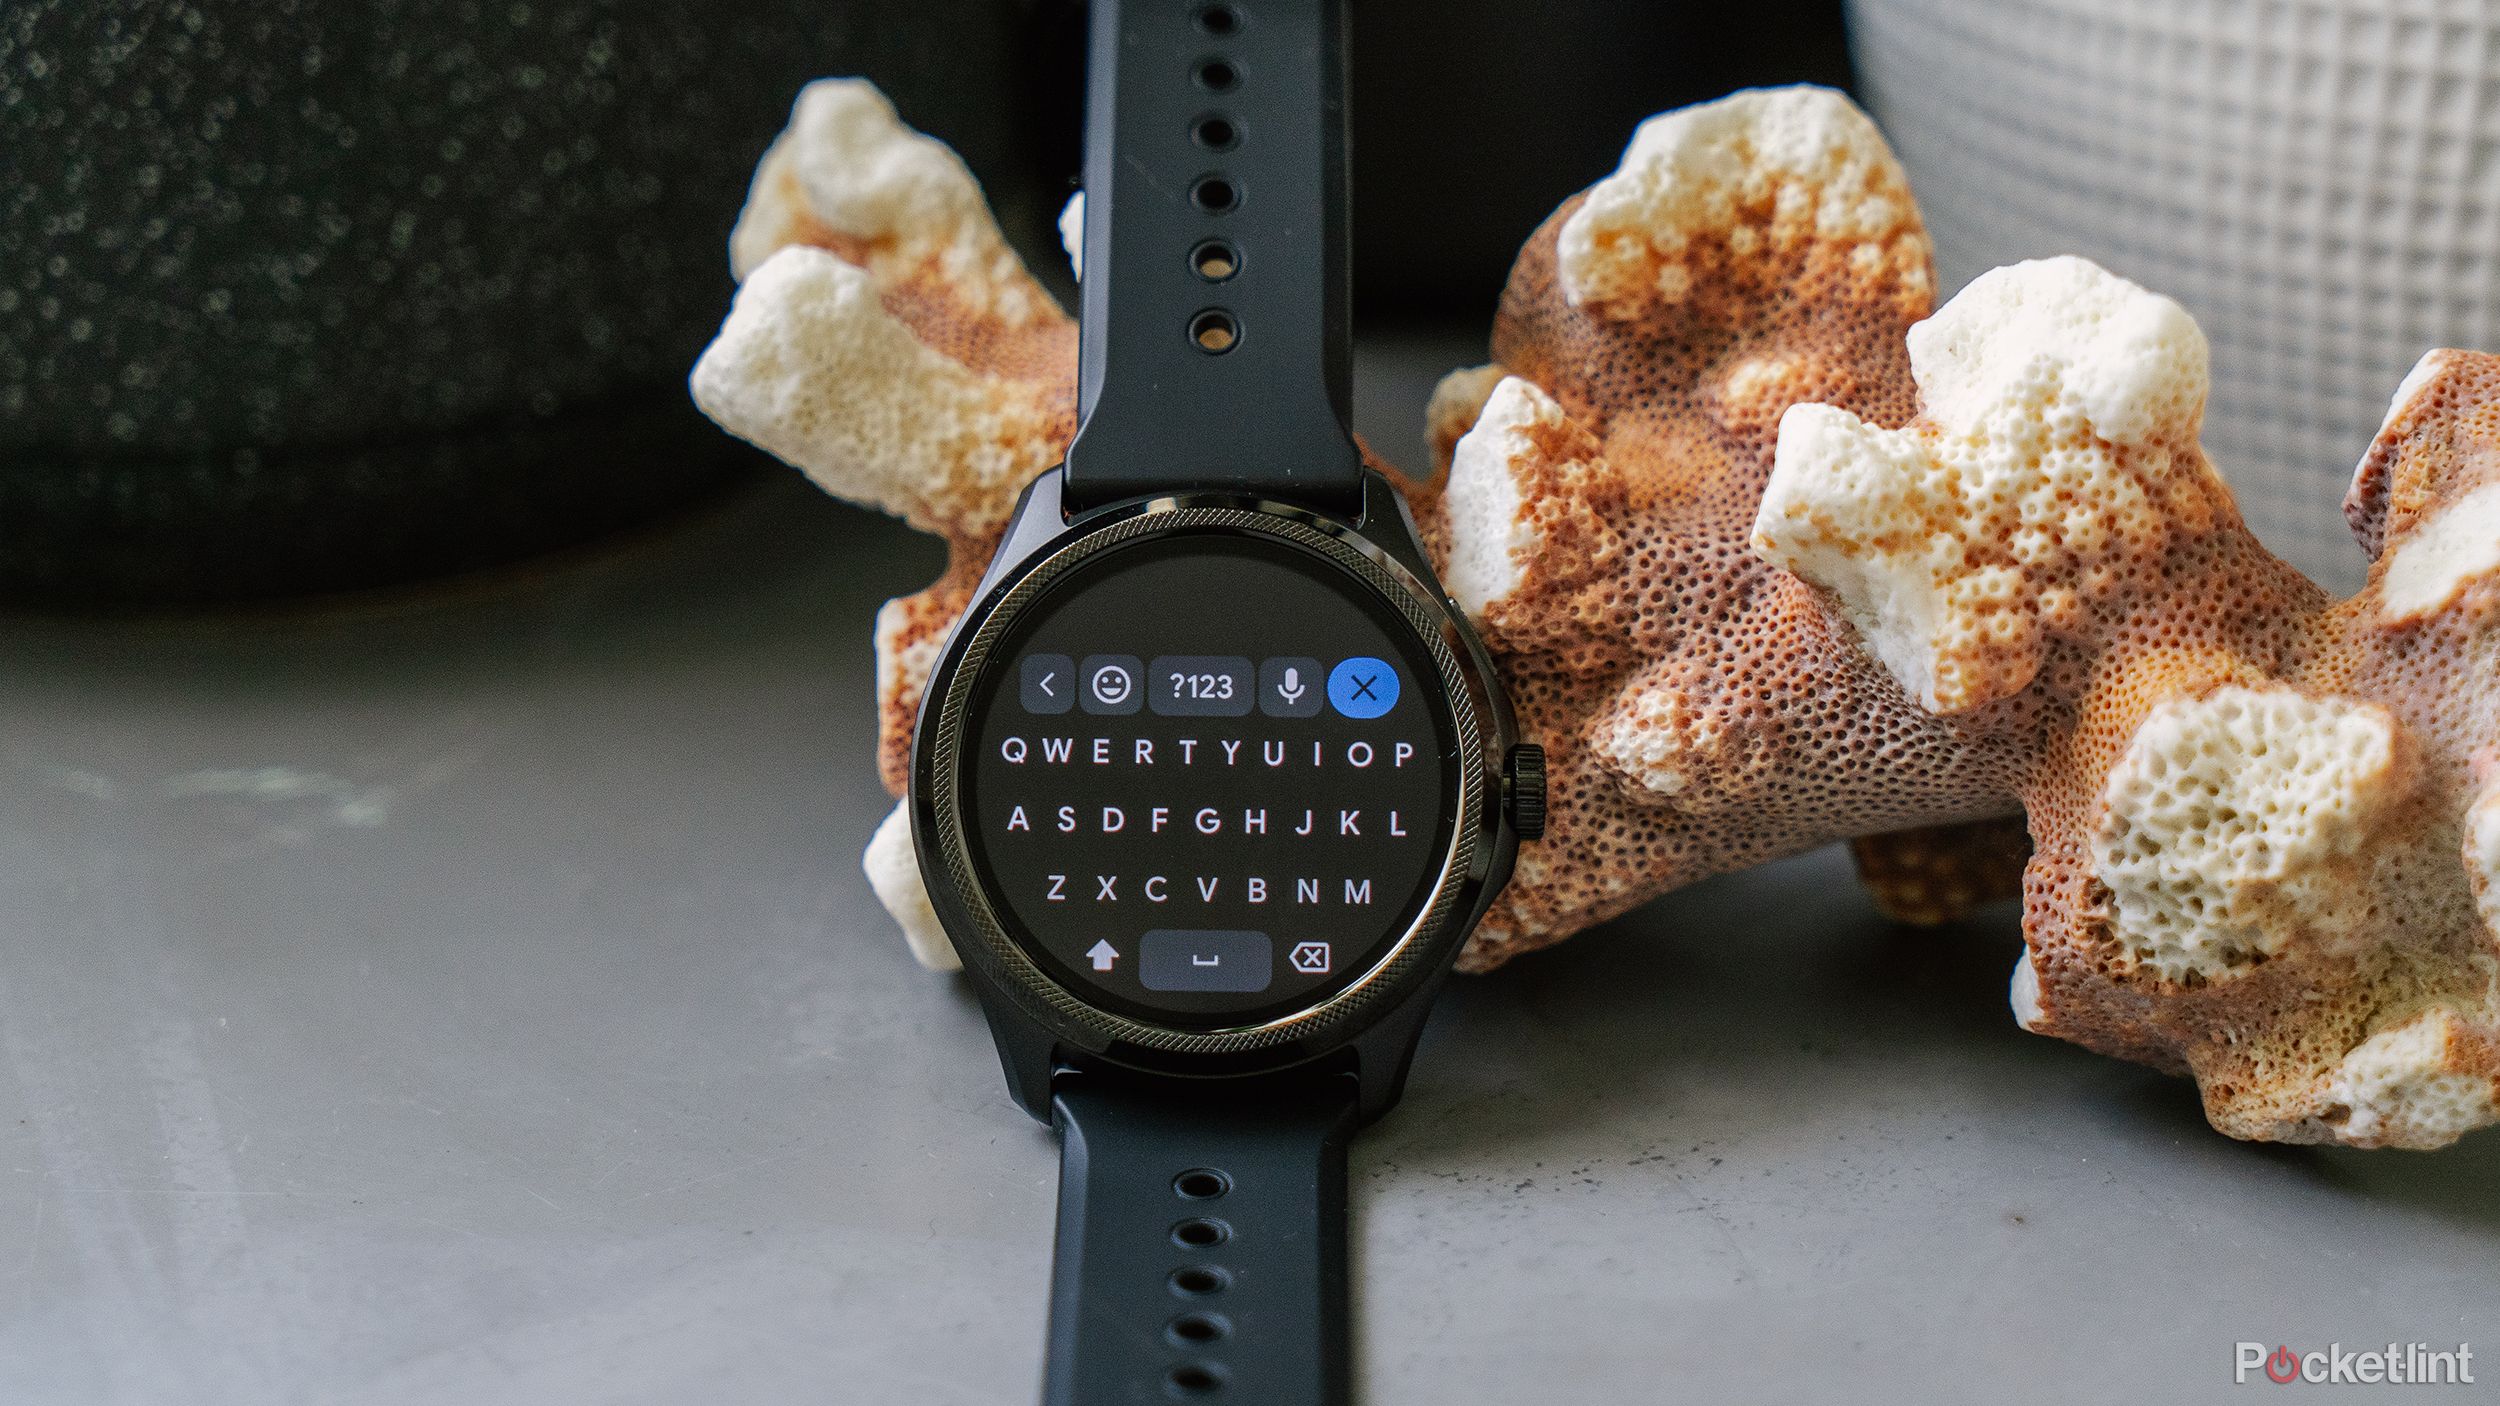 The Gboard app is displayed on the TicWatch Pro 5.